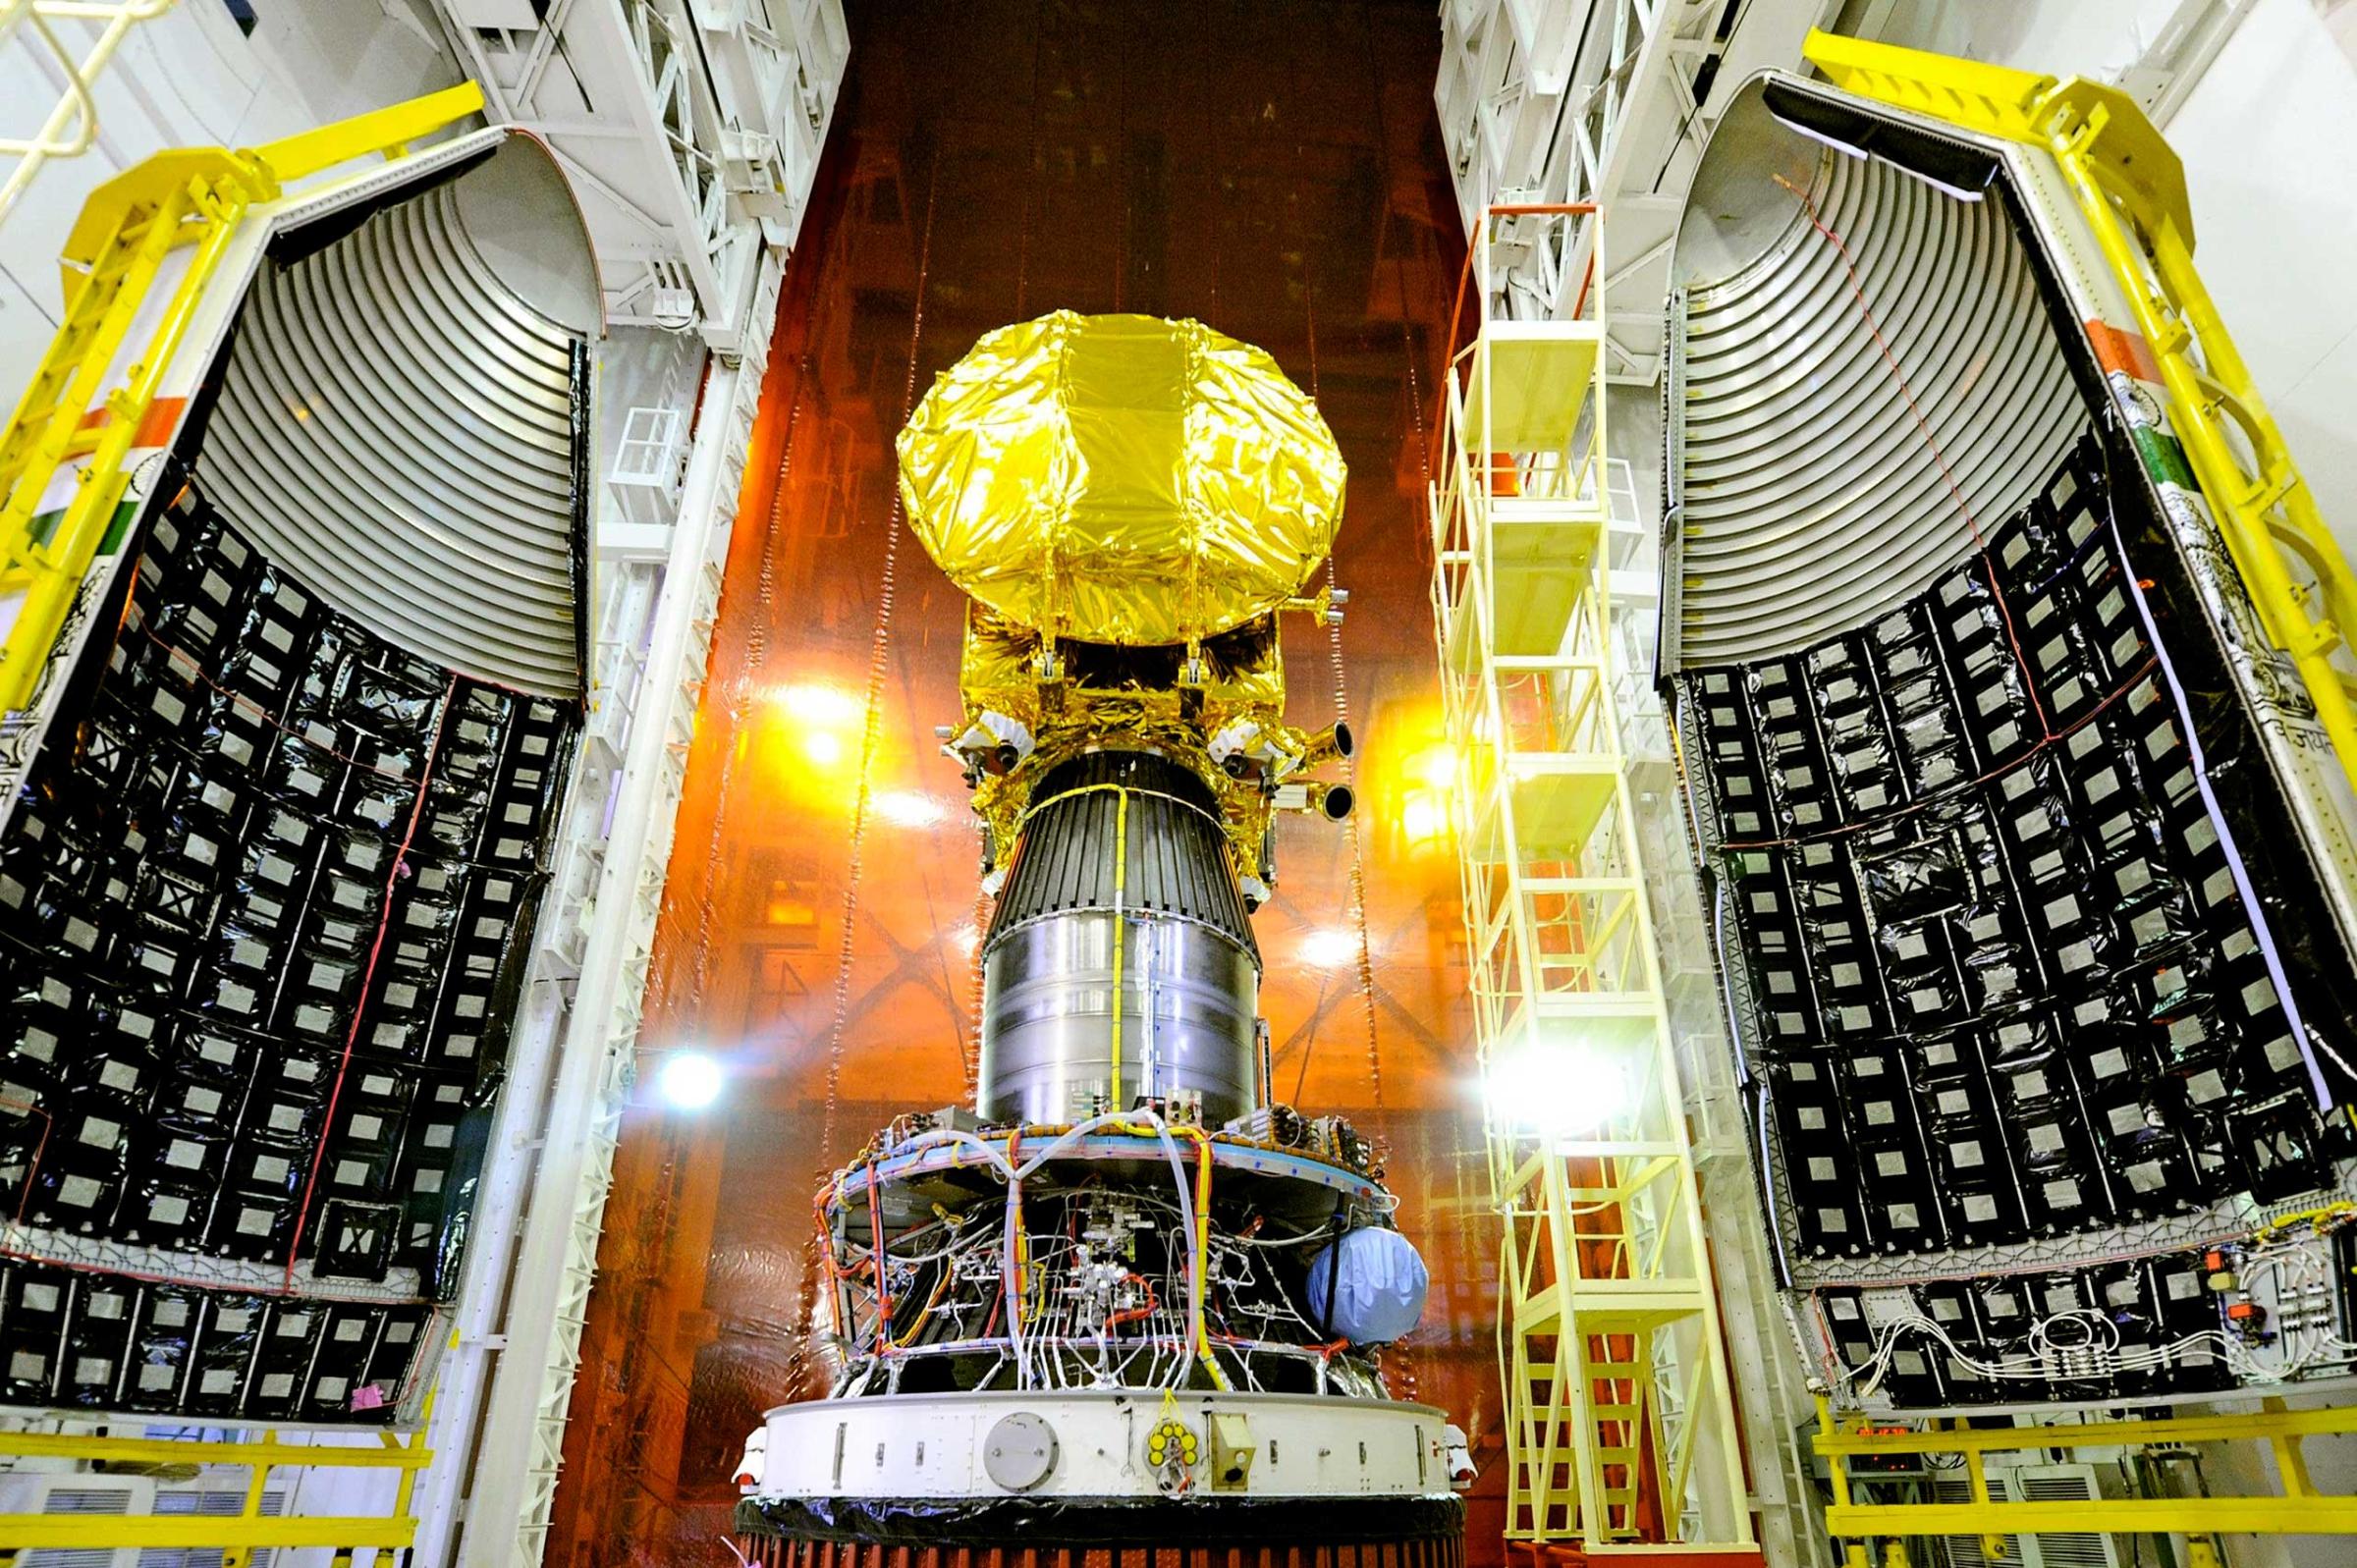 Mangalyaan, India's Mars Orbiter Mission, is prepared for its Nov. 5, 2013 launch into space.